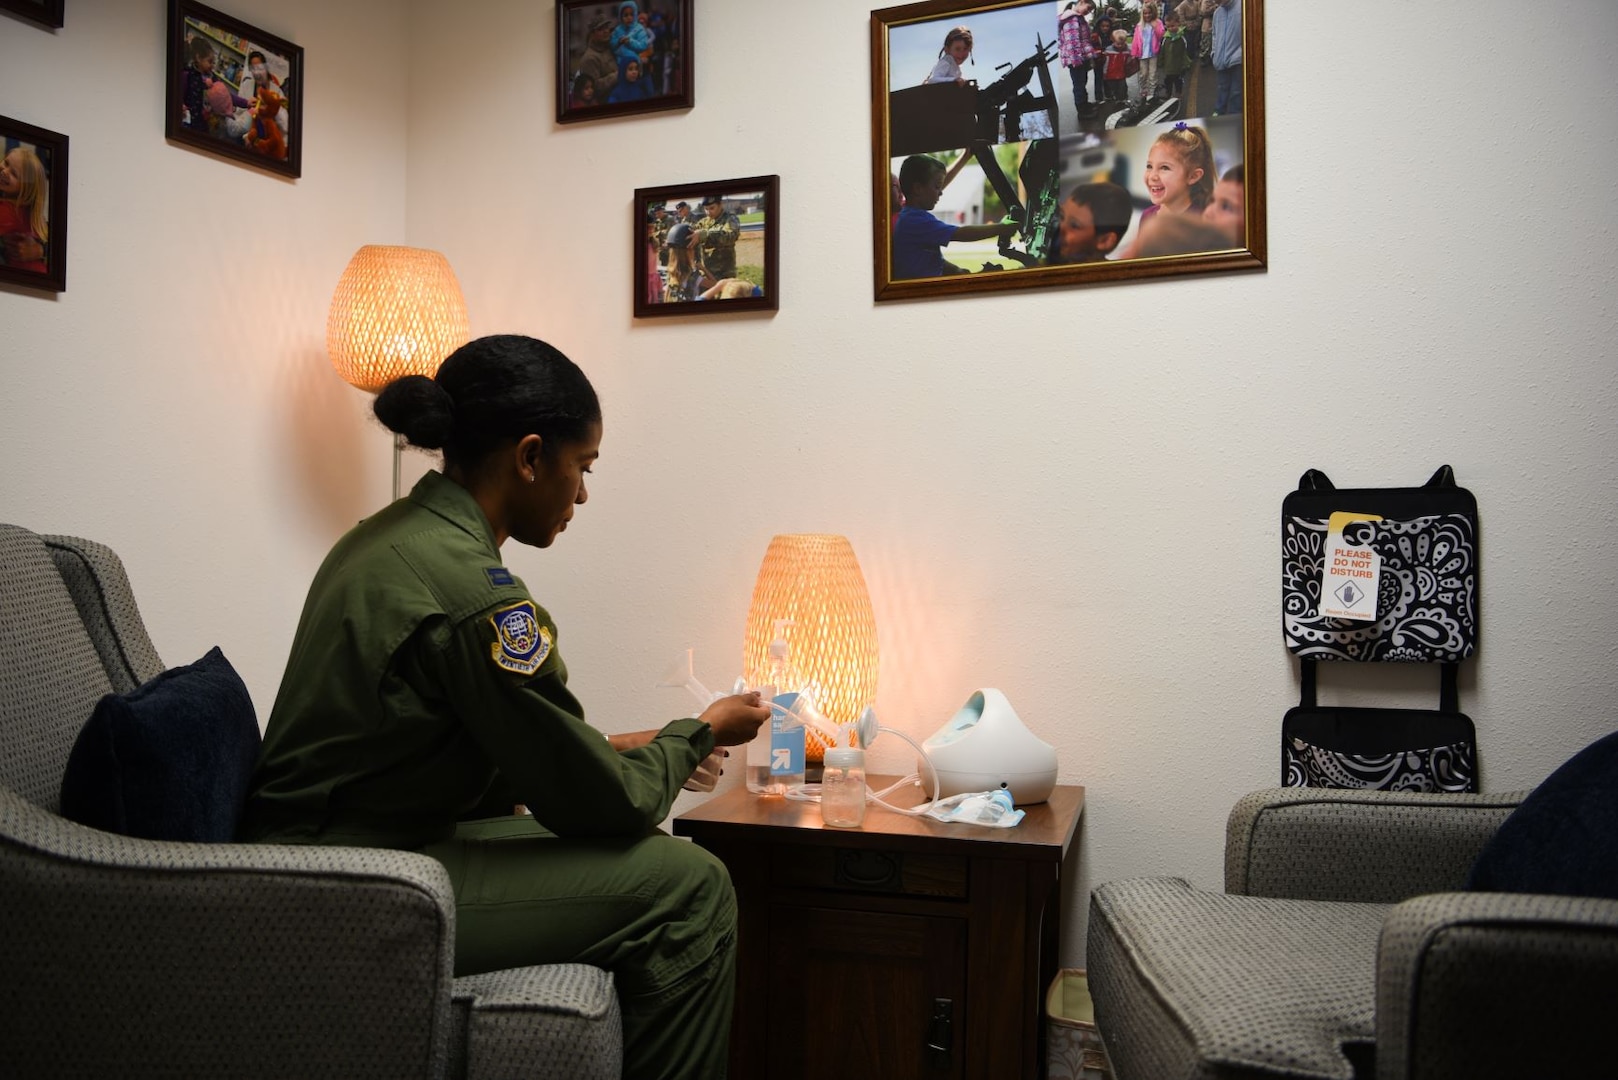 Capt. Ebony Godfrey, 20th Air Force nuclear command, control and communication operations chief, assembles a breast pump in the 20th Air Force headquarters lactation room, Sept. 3, 2020, at F. E. Warren Air Force Base, Wyo. Lactation rooms at bases across the Air Force provide a private and comfortable environment for nursing mothers to express breastmilk, which promotes health for both the mother and baby. Enabling mothers to fulfill their motherhood responsibilities at work benefits mission readiness, both in the short and long term. (U.S. Air Force photo by Capt. Ieva Bytautaite)